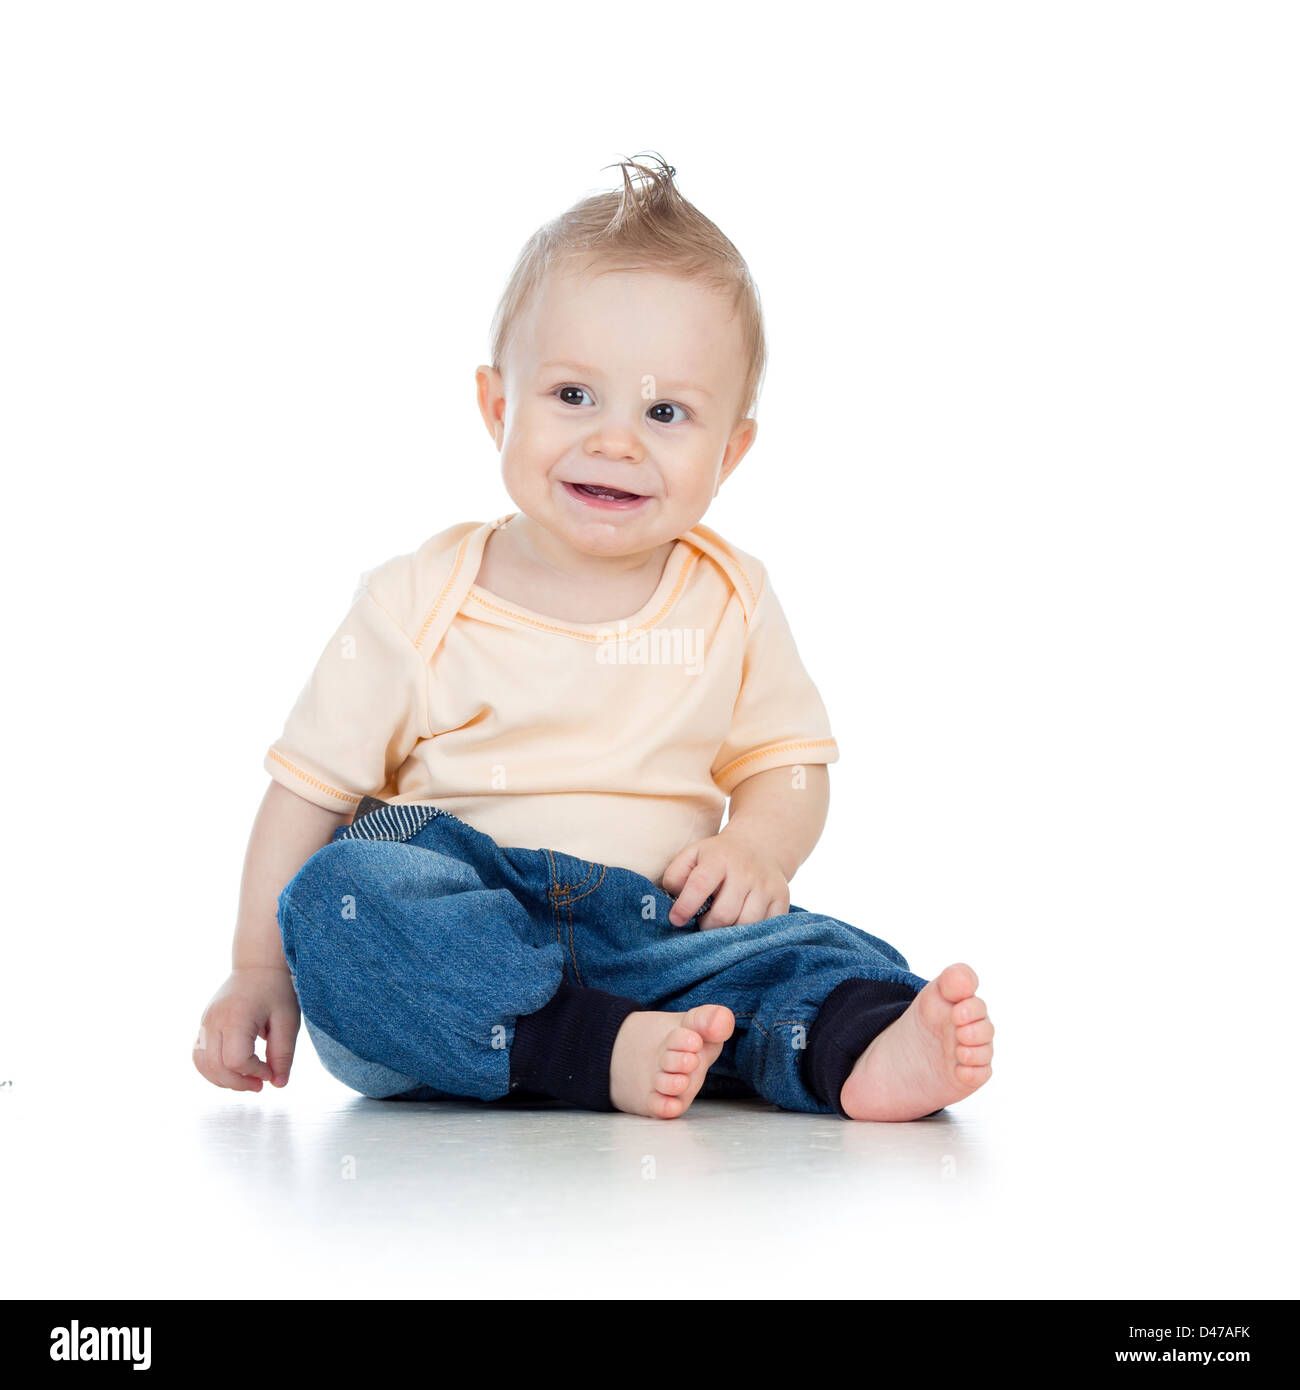 Kid sitting and smiling Cut Out Stock Images & Pictures - Alamy